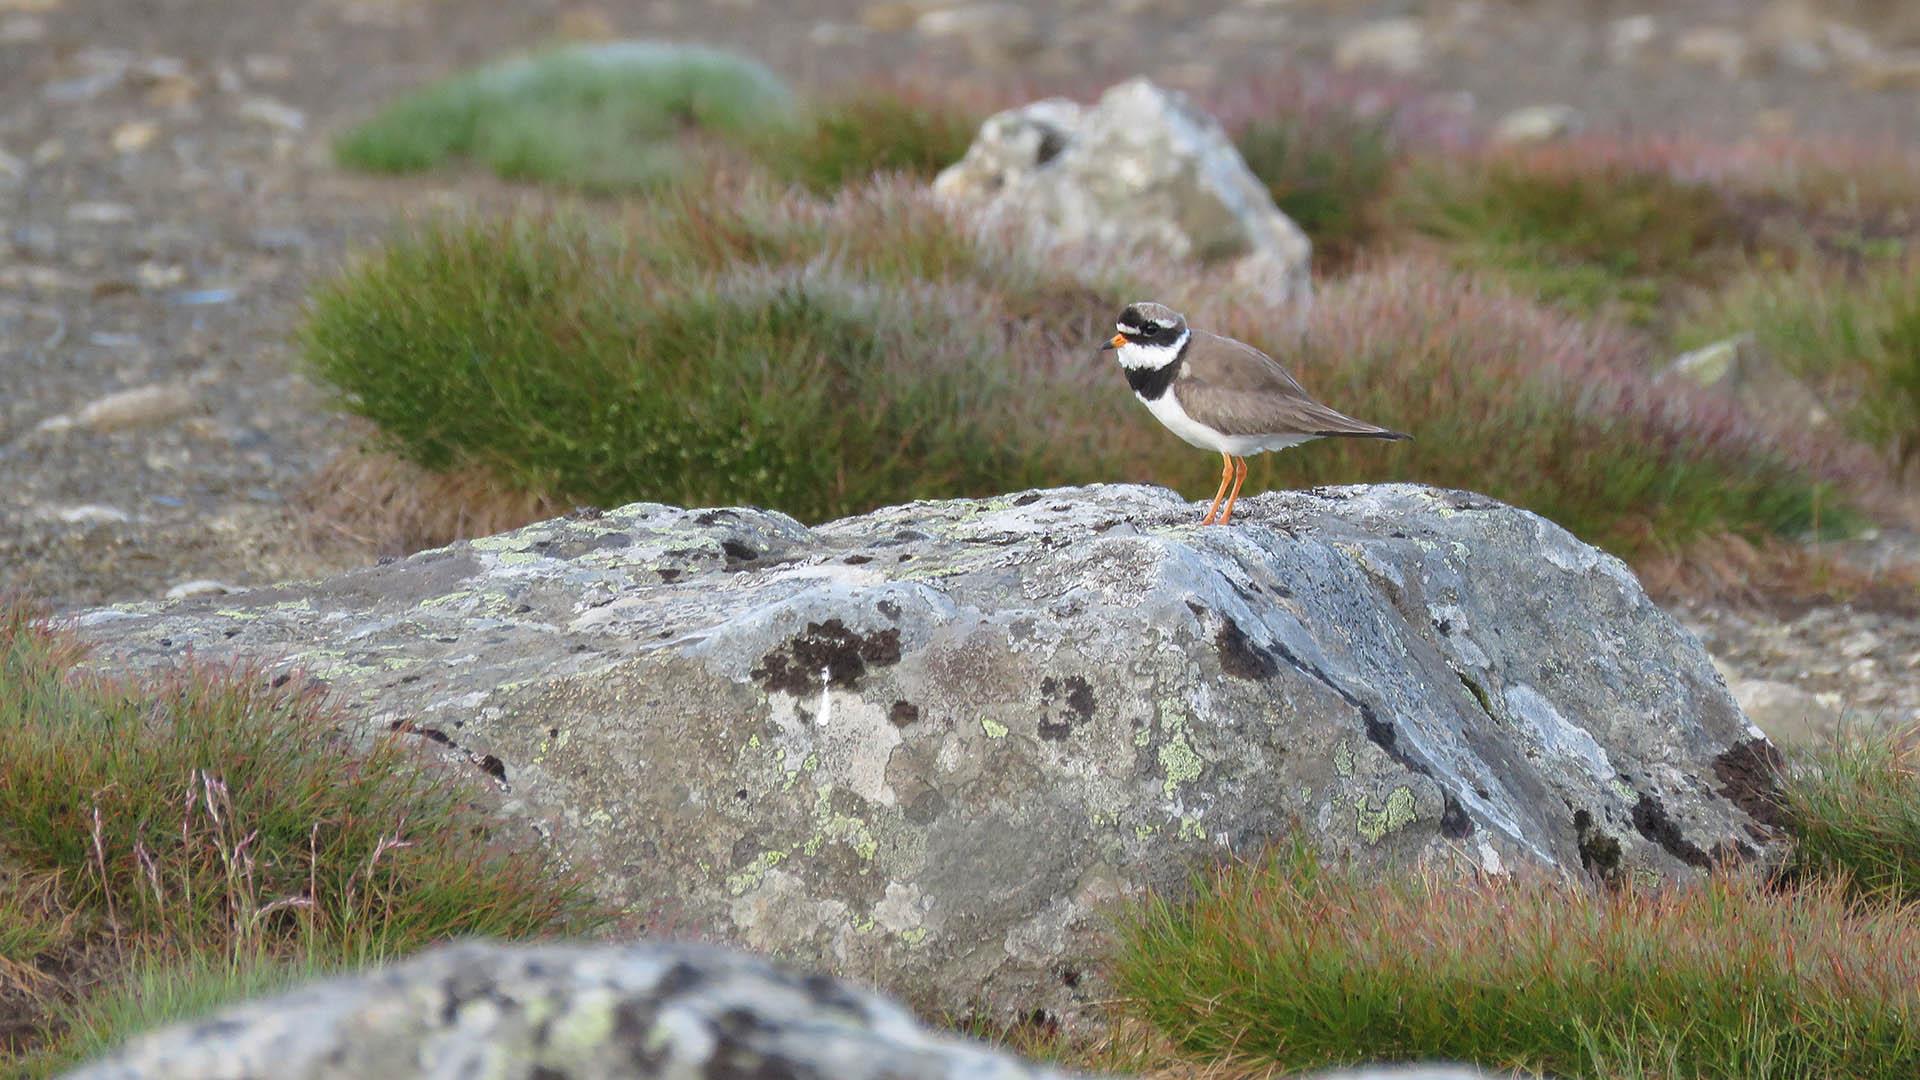 Common ringed plover on a lichen-covered rock